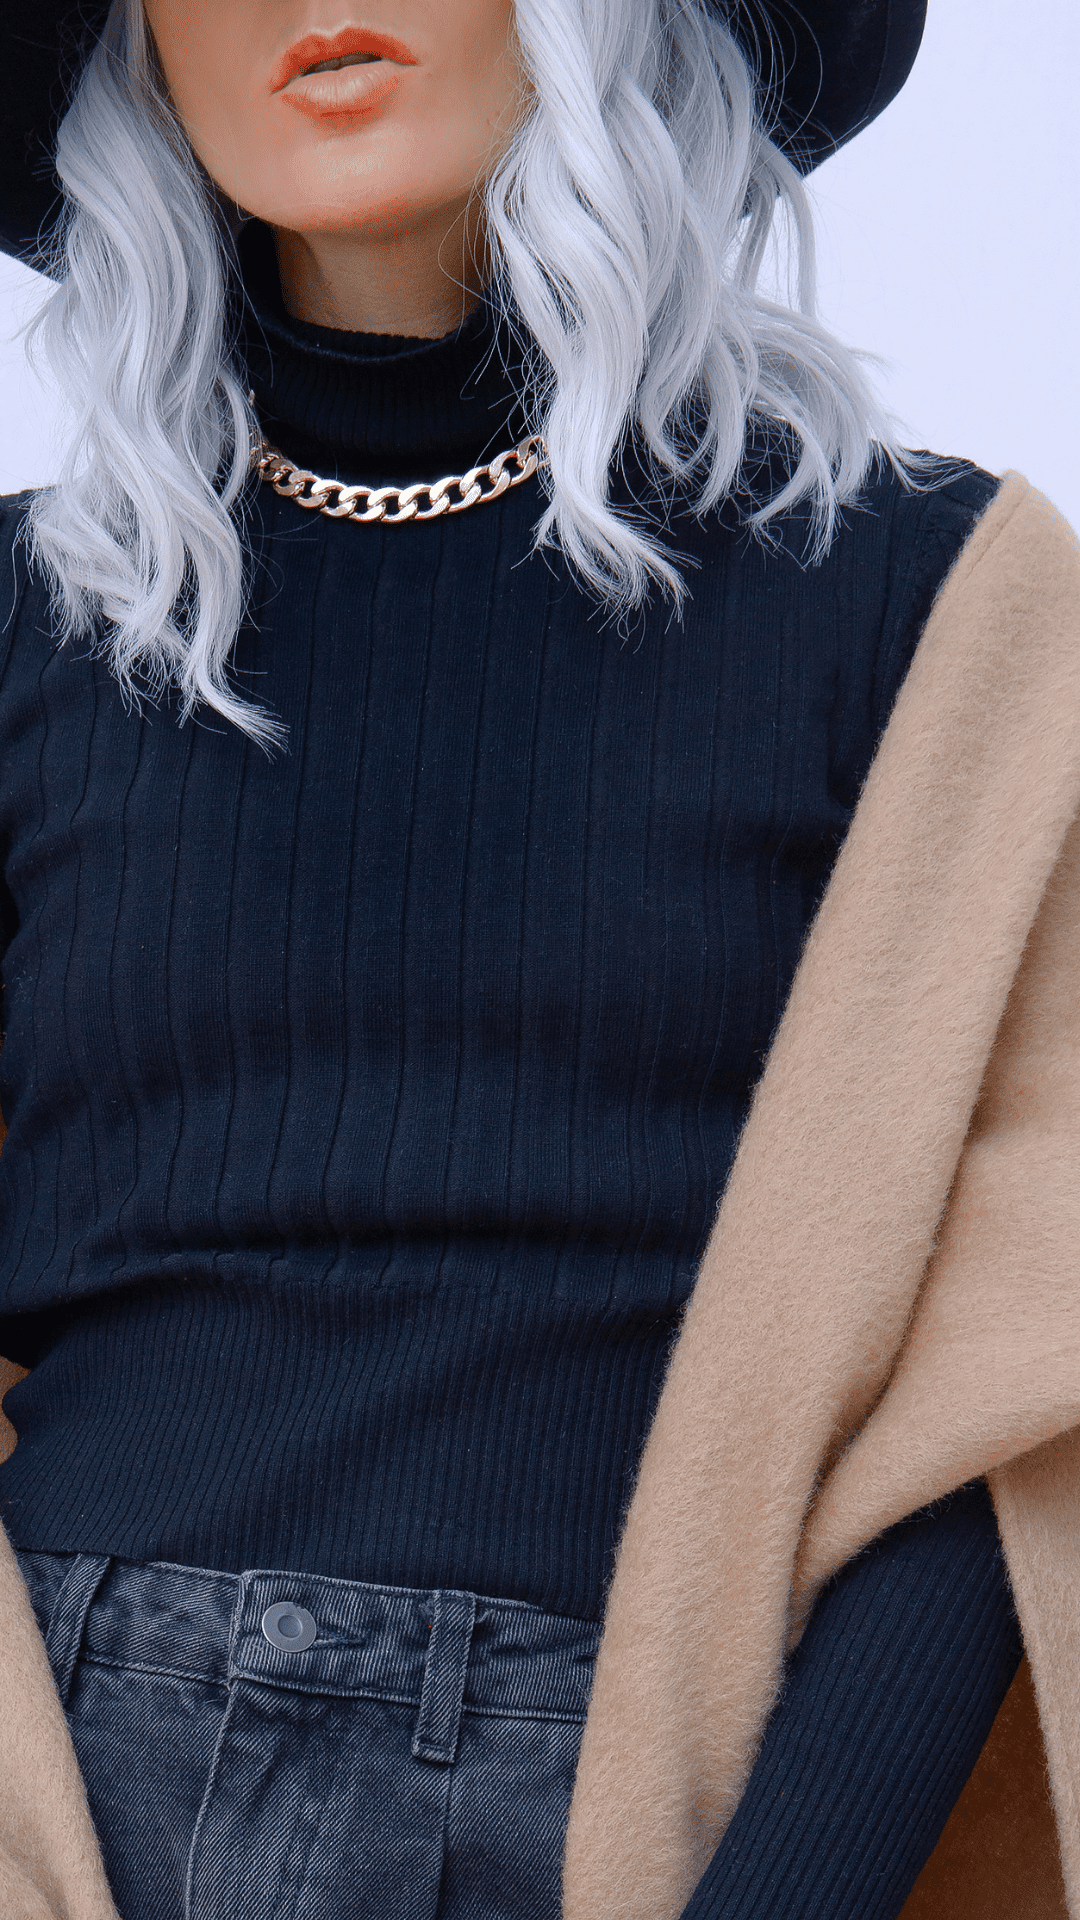 4 Items to Include in a Winter Capsule Wardrobe